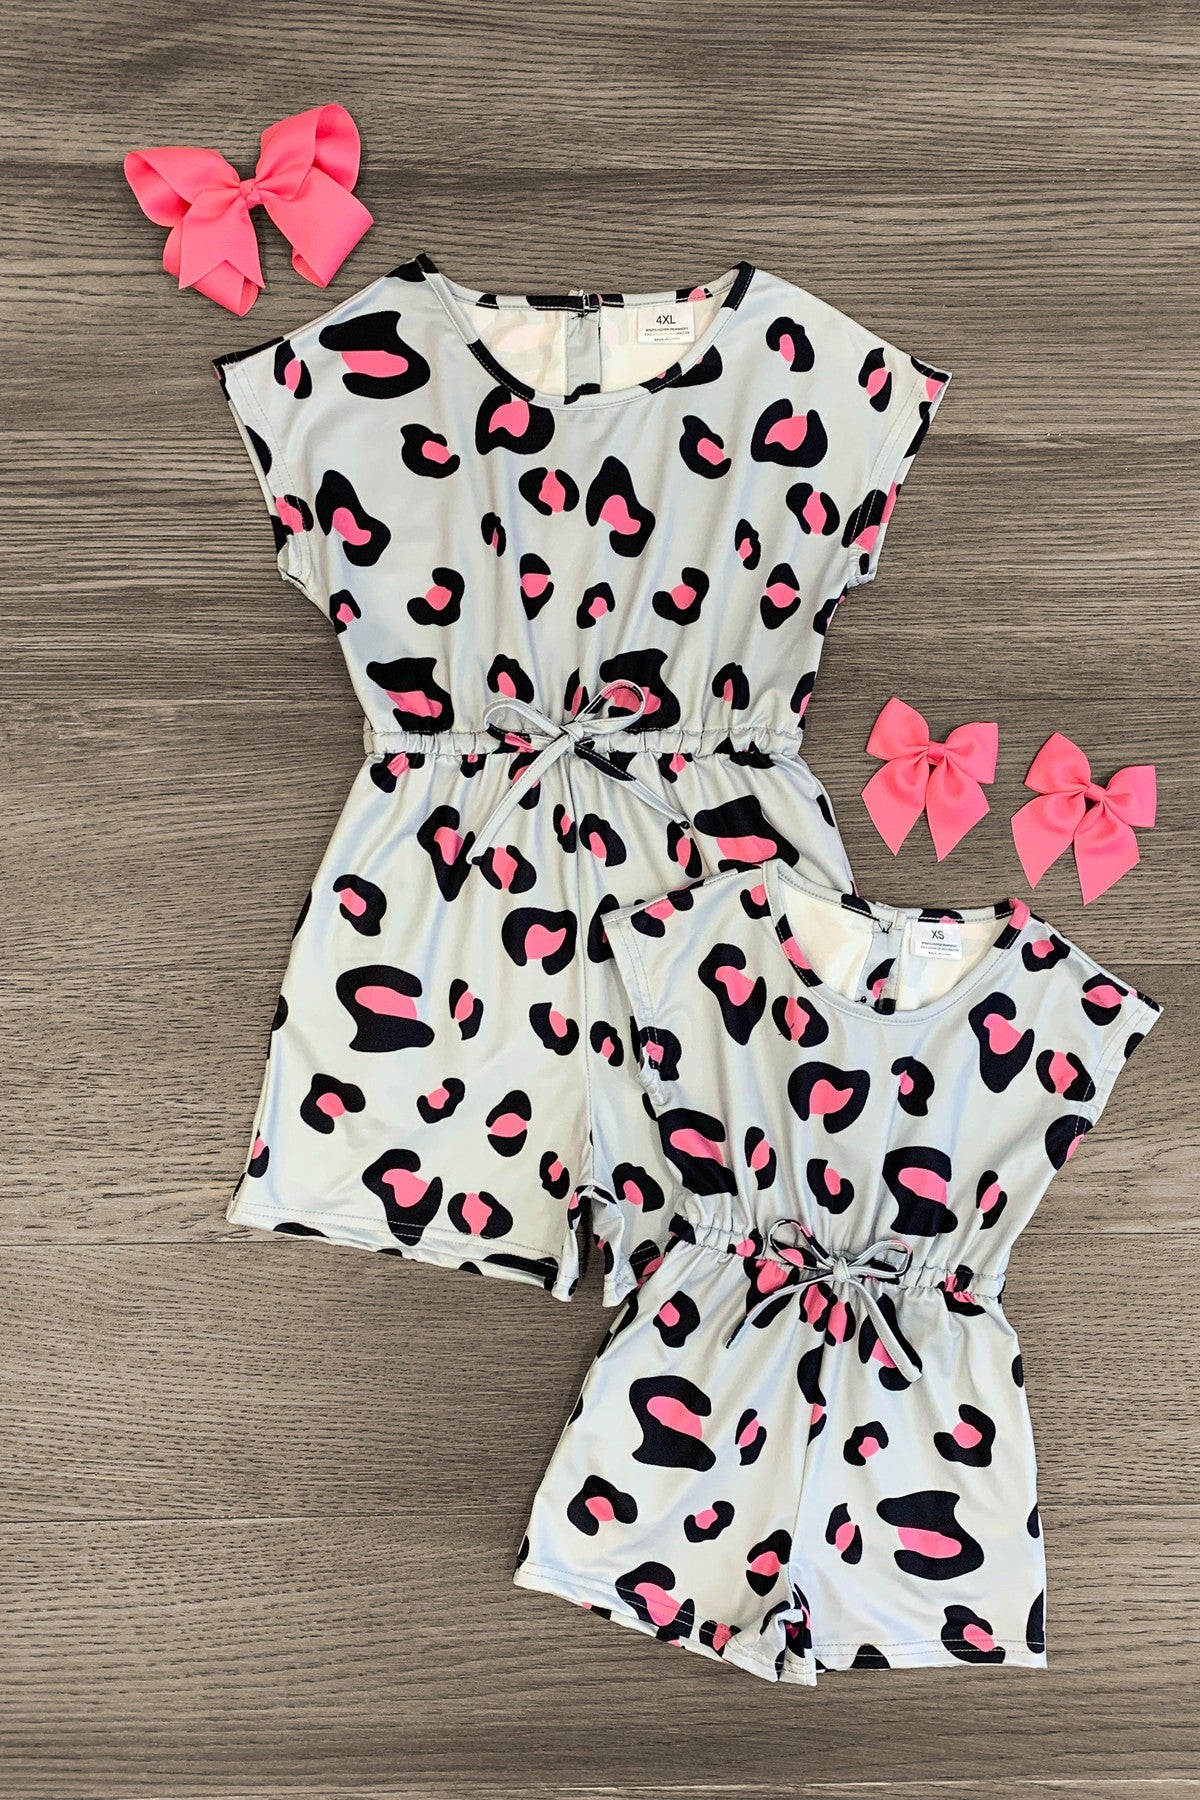 Mom & Me - Gray & Pink Cheetah Romper - Sparkle in Pink